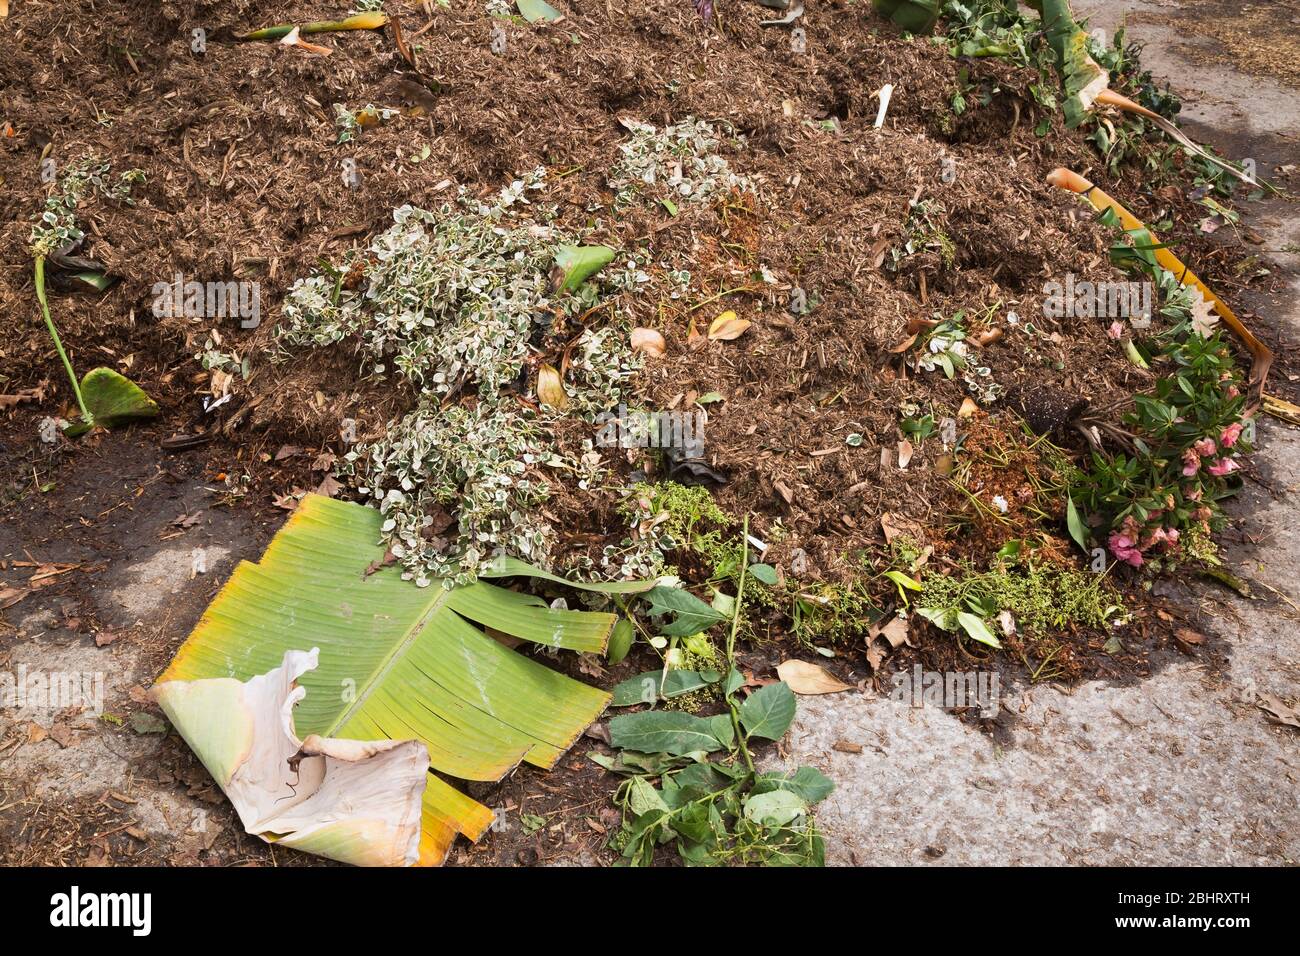 Pile of plant leaves, twigs and woodchips composting in outdoor bin Stock Photo